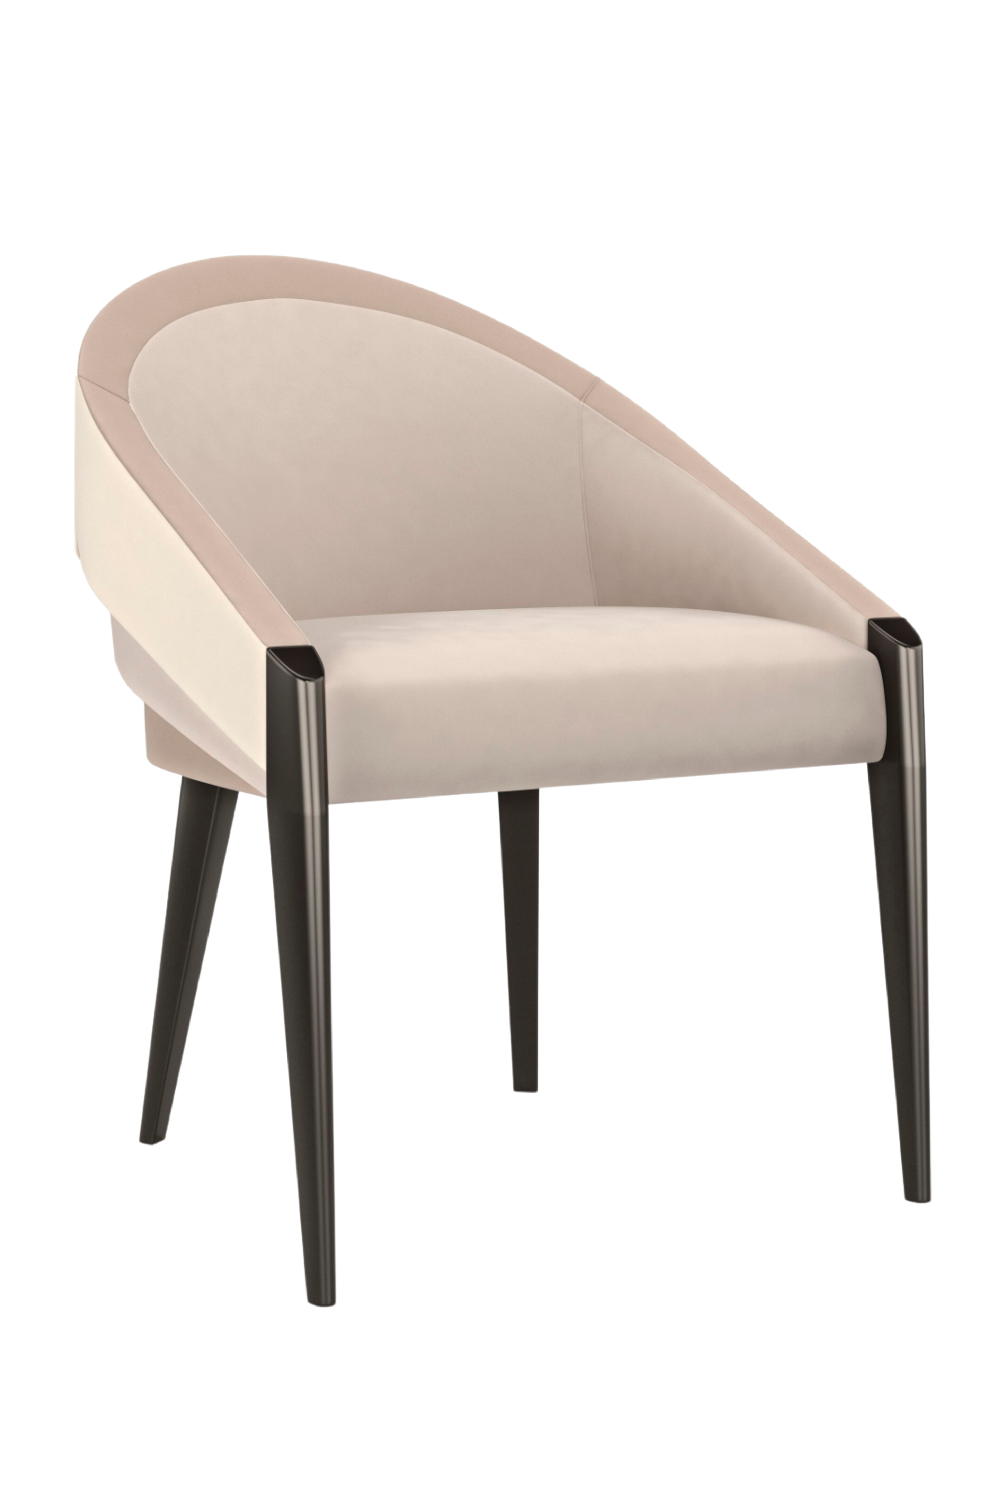 Velvet Modern Accent Chair | Caracole On All Levels | Oroa.com